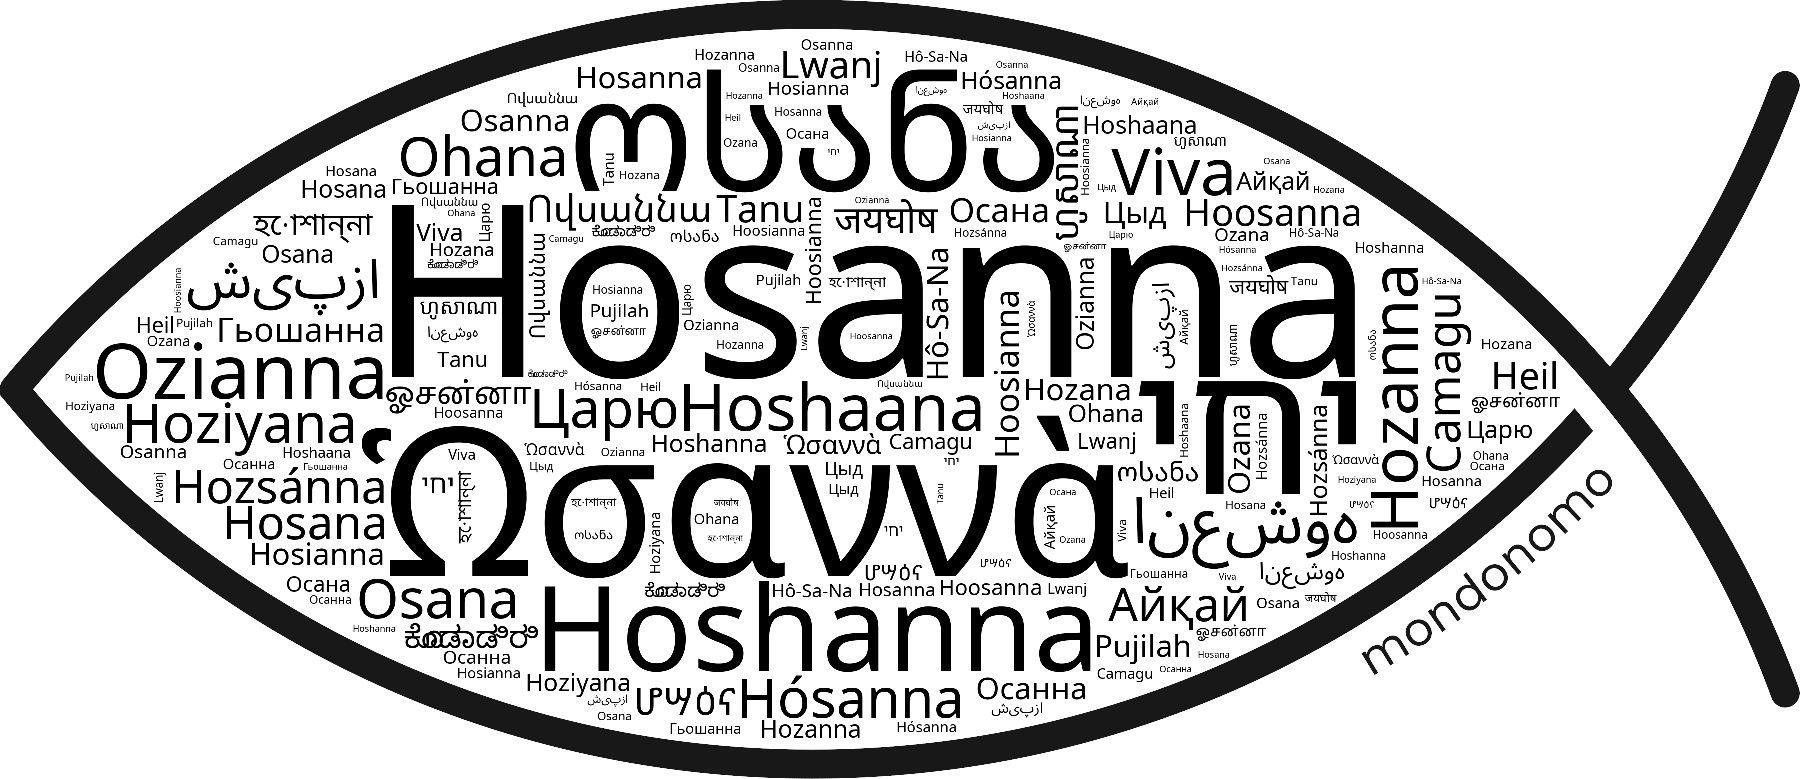 Name Hosanna in the world's Bibles